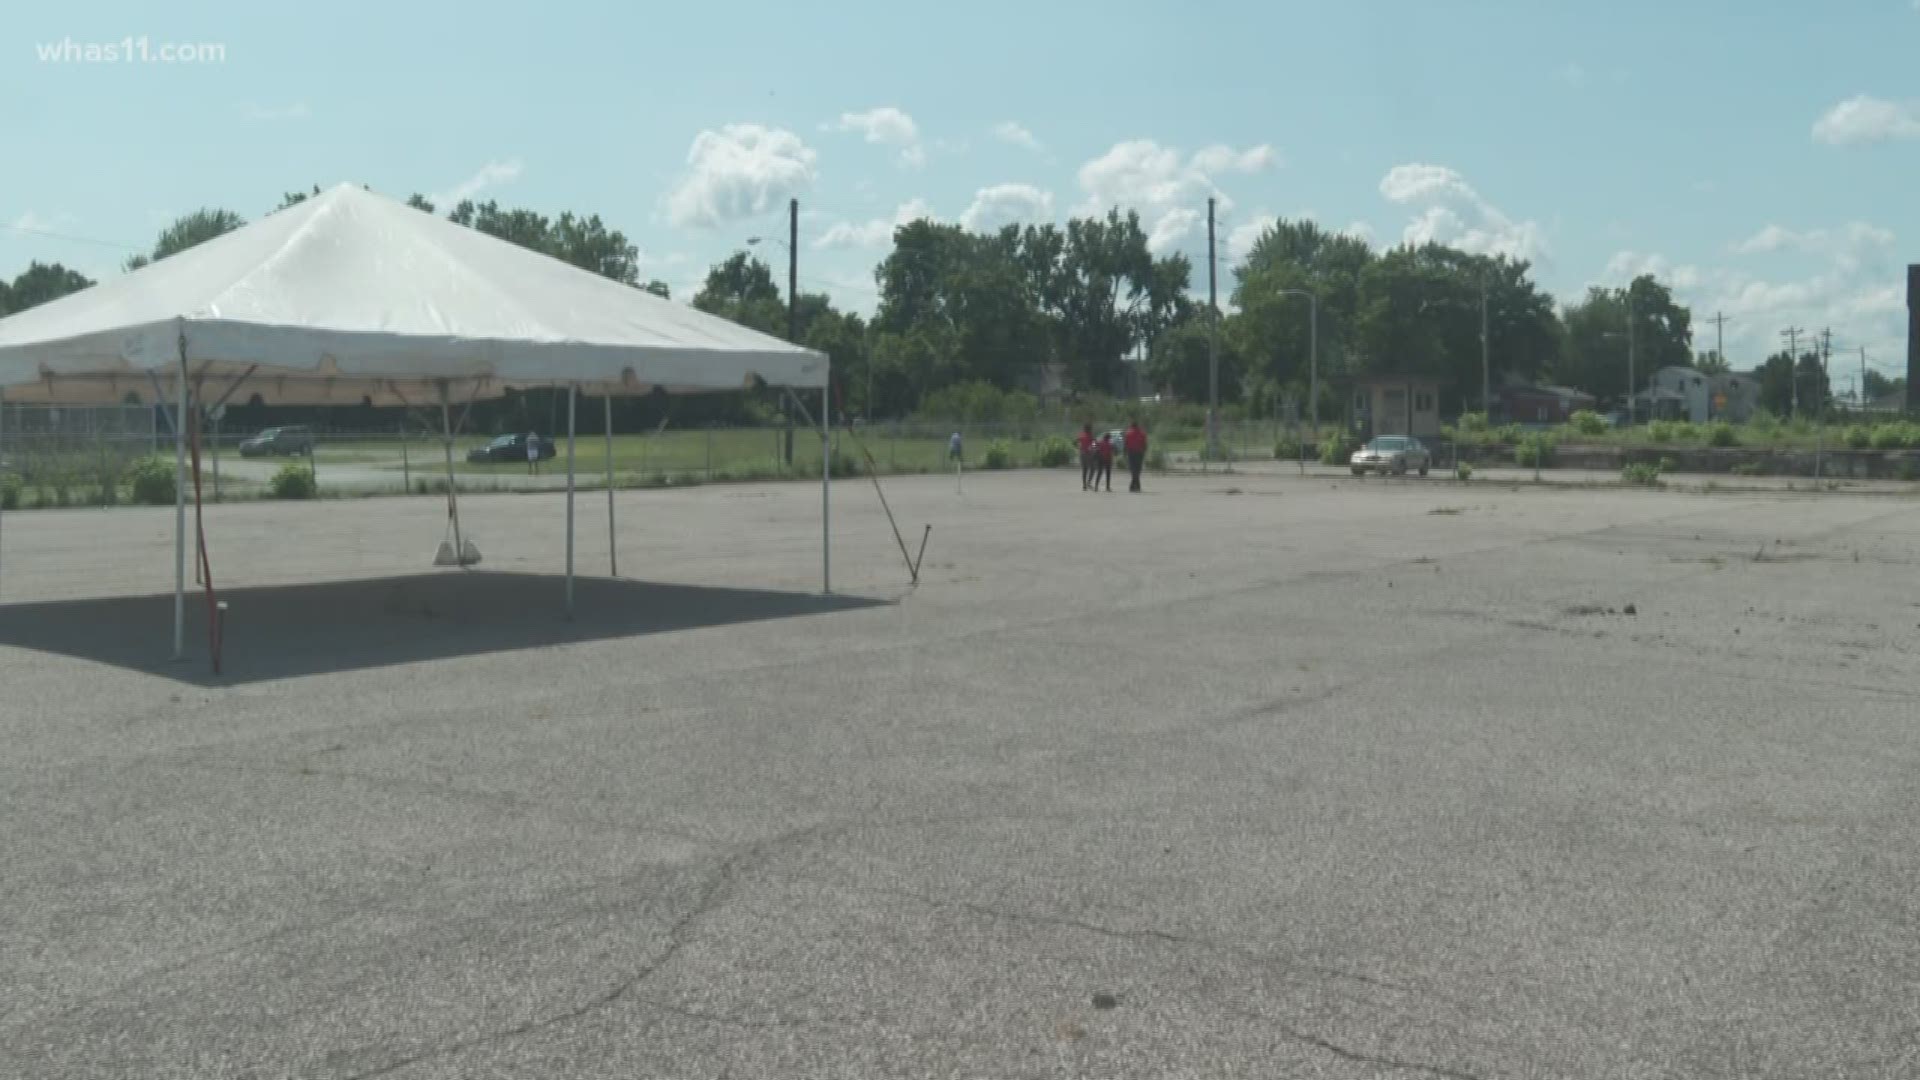 The Louisville Urban League will host a groundbreaking on Tuesday for its sports and learning complex.